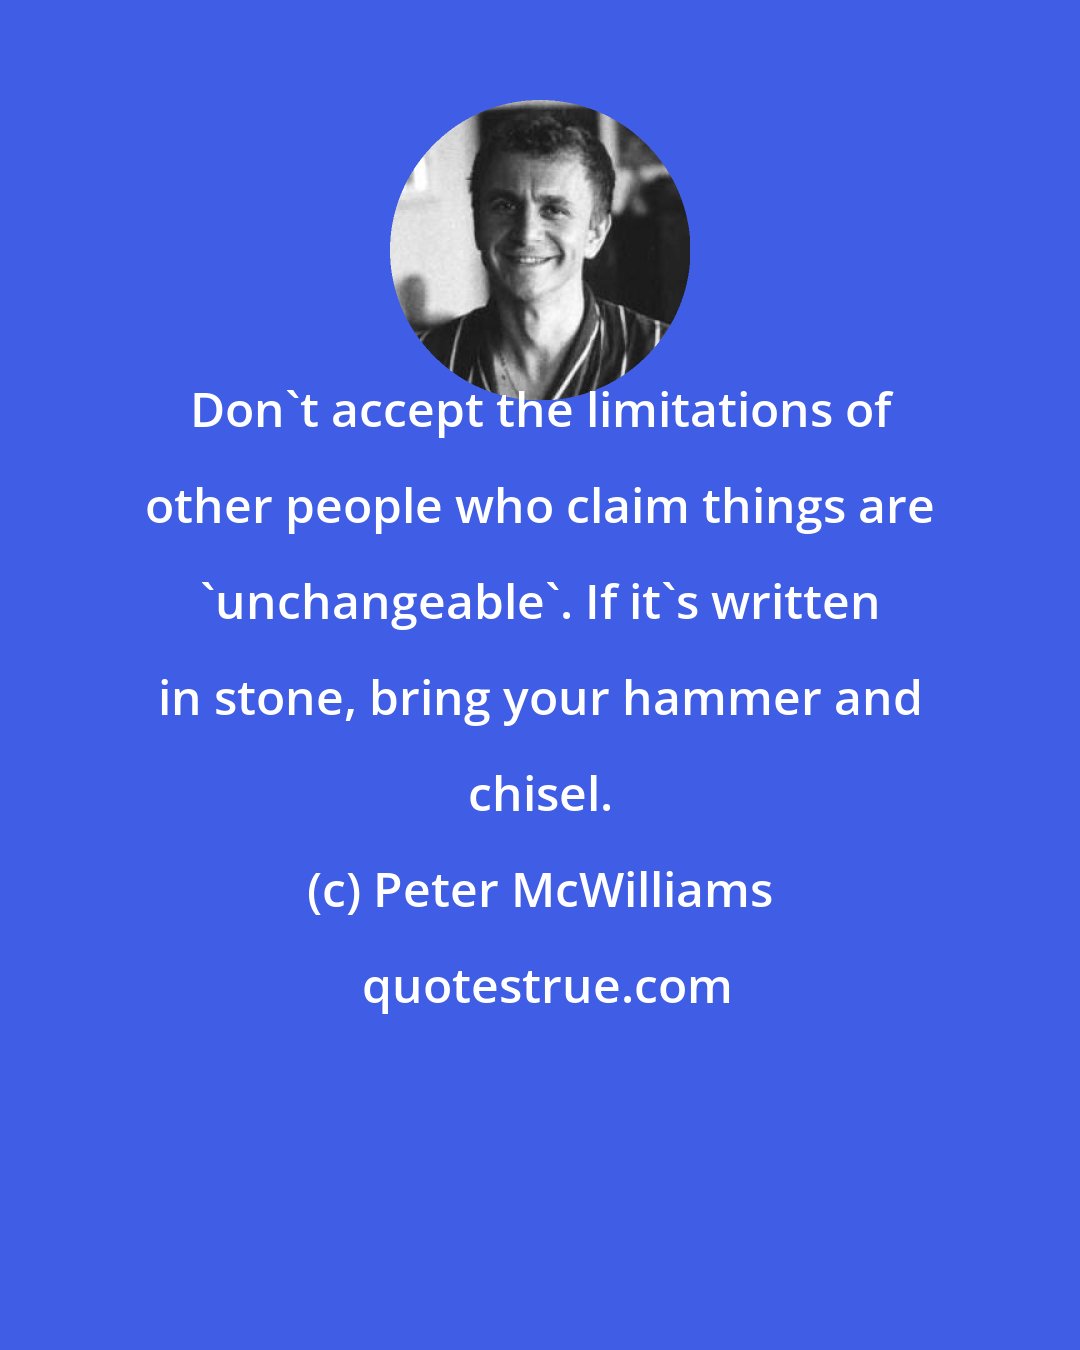 Peter McWilliams: Don't accept the limitations of other people who claim things are 'unchangeable'. If it's written in stone, bring your hammer and chisel.